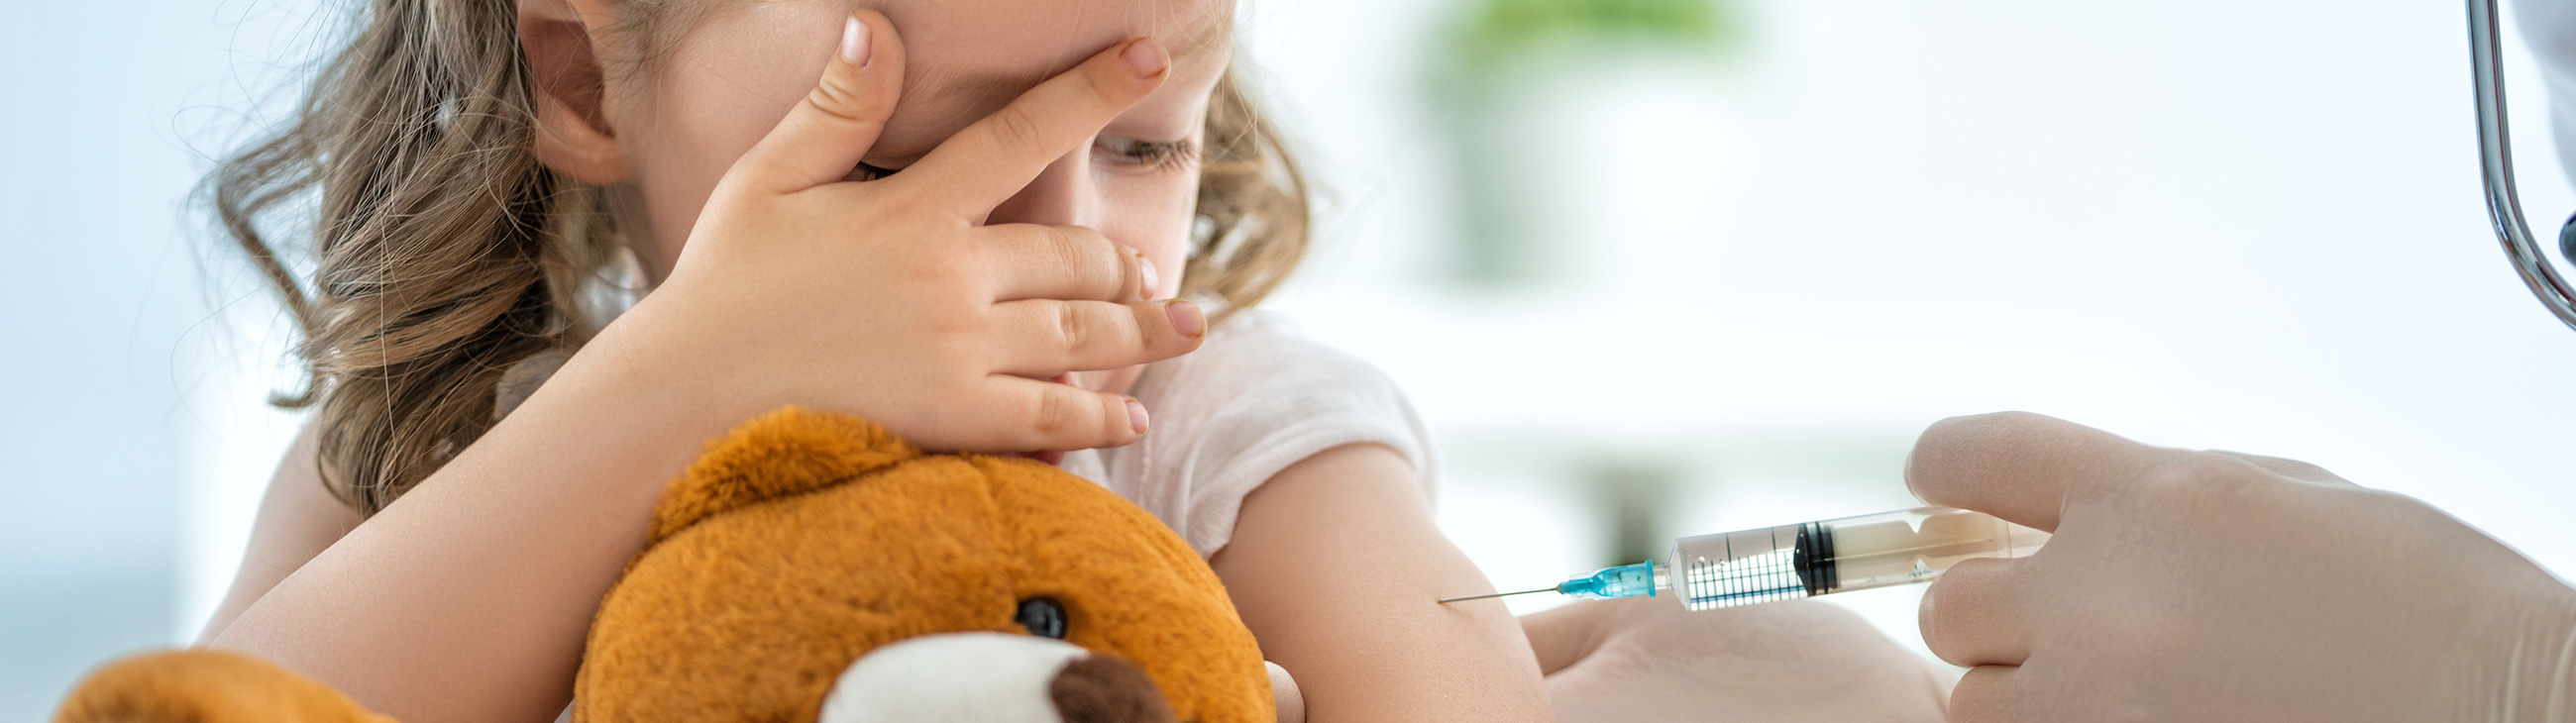 Eczema and vaccines: should you avoid vaccinating your child?